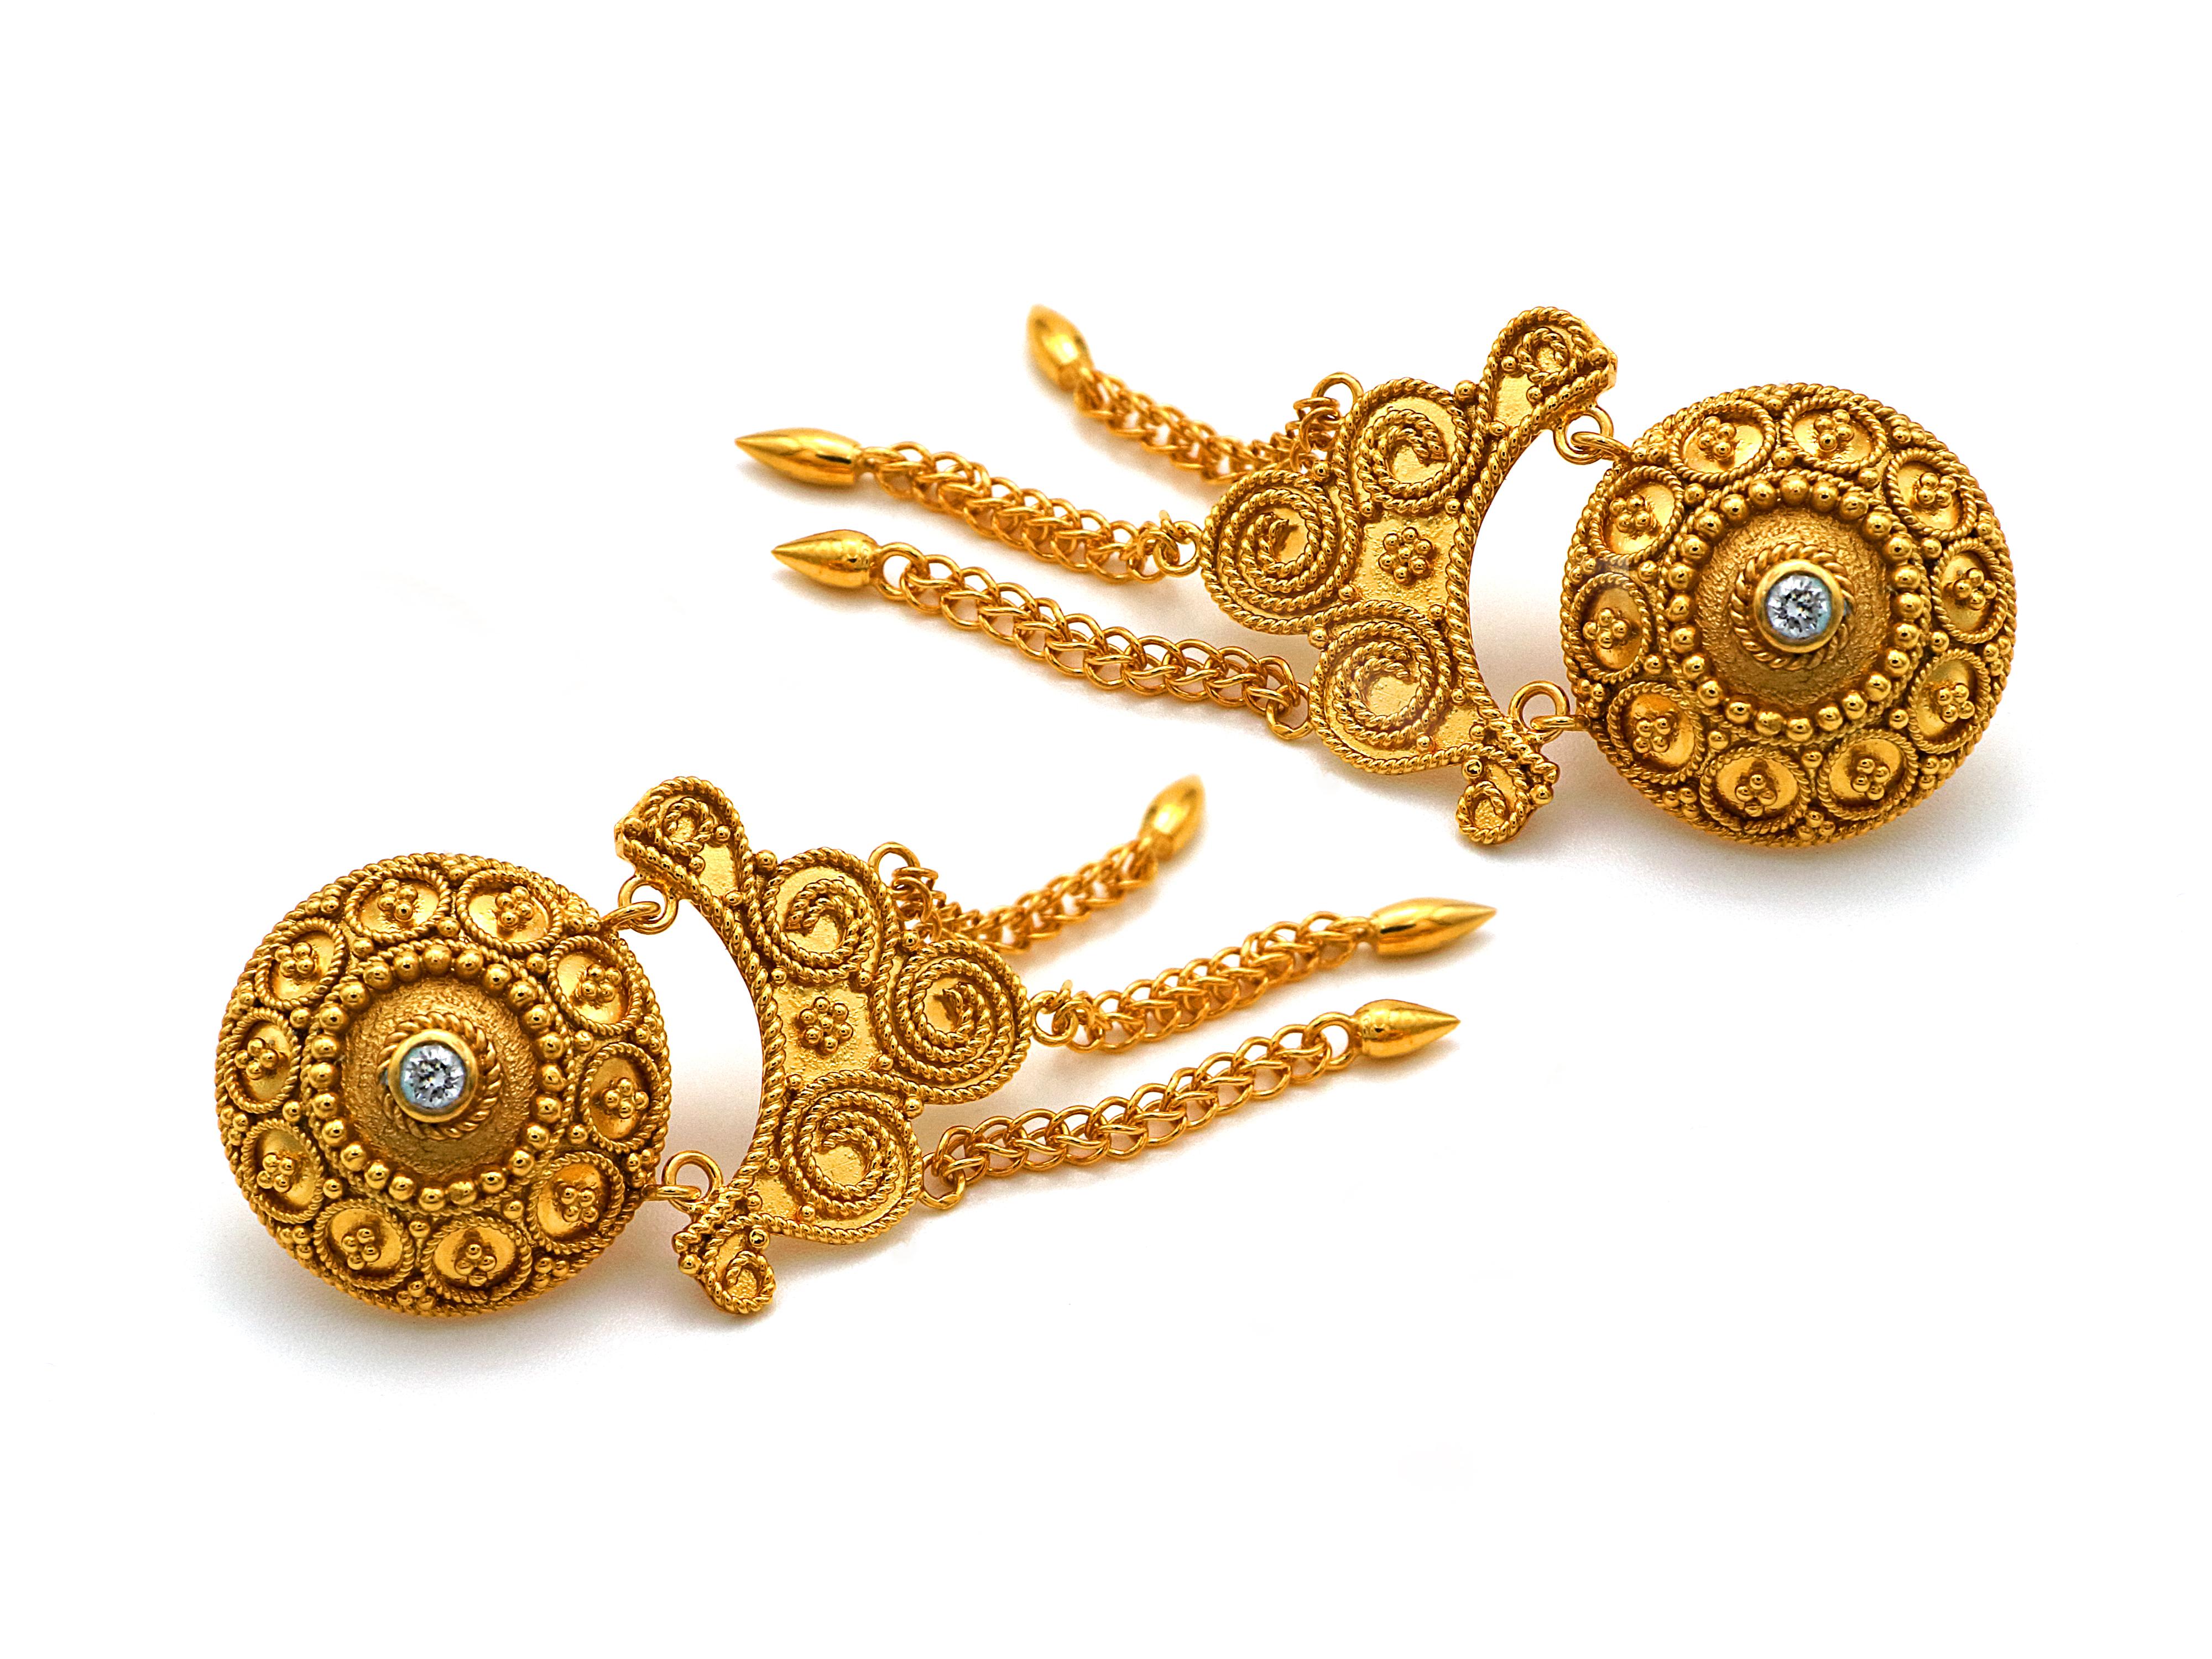 Neoclassic bottom earring with granulation and filigrees on the earlobe and a touch of the Greek seas dangling under it. 
The waves are made out of filigree, attached to them you can see a handmade chain finishing in spheres. The center domes host